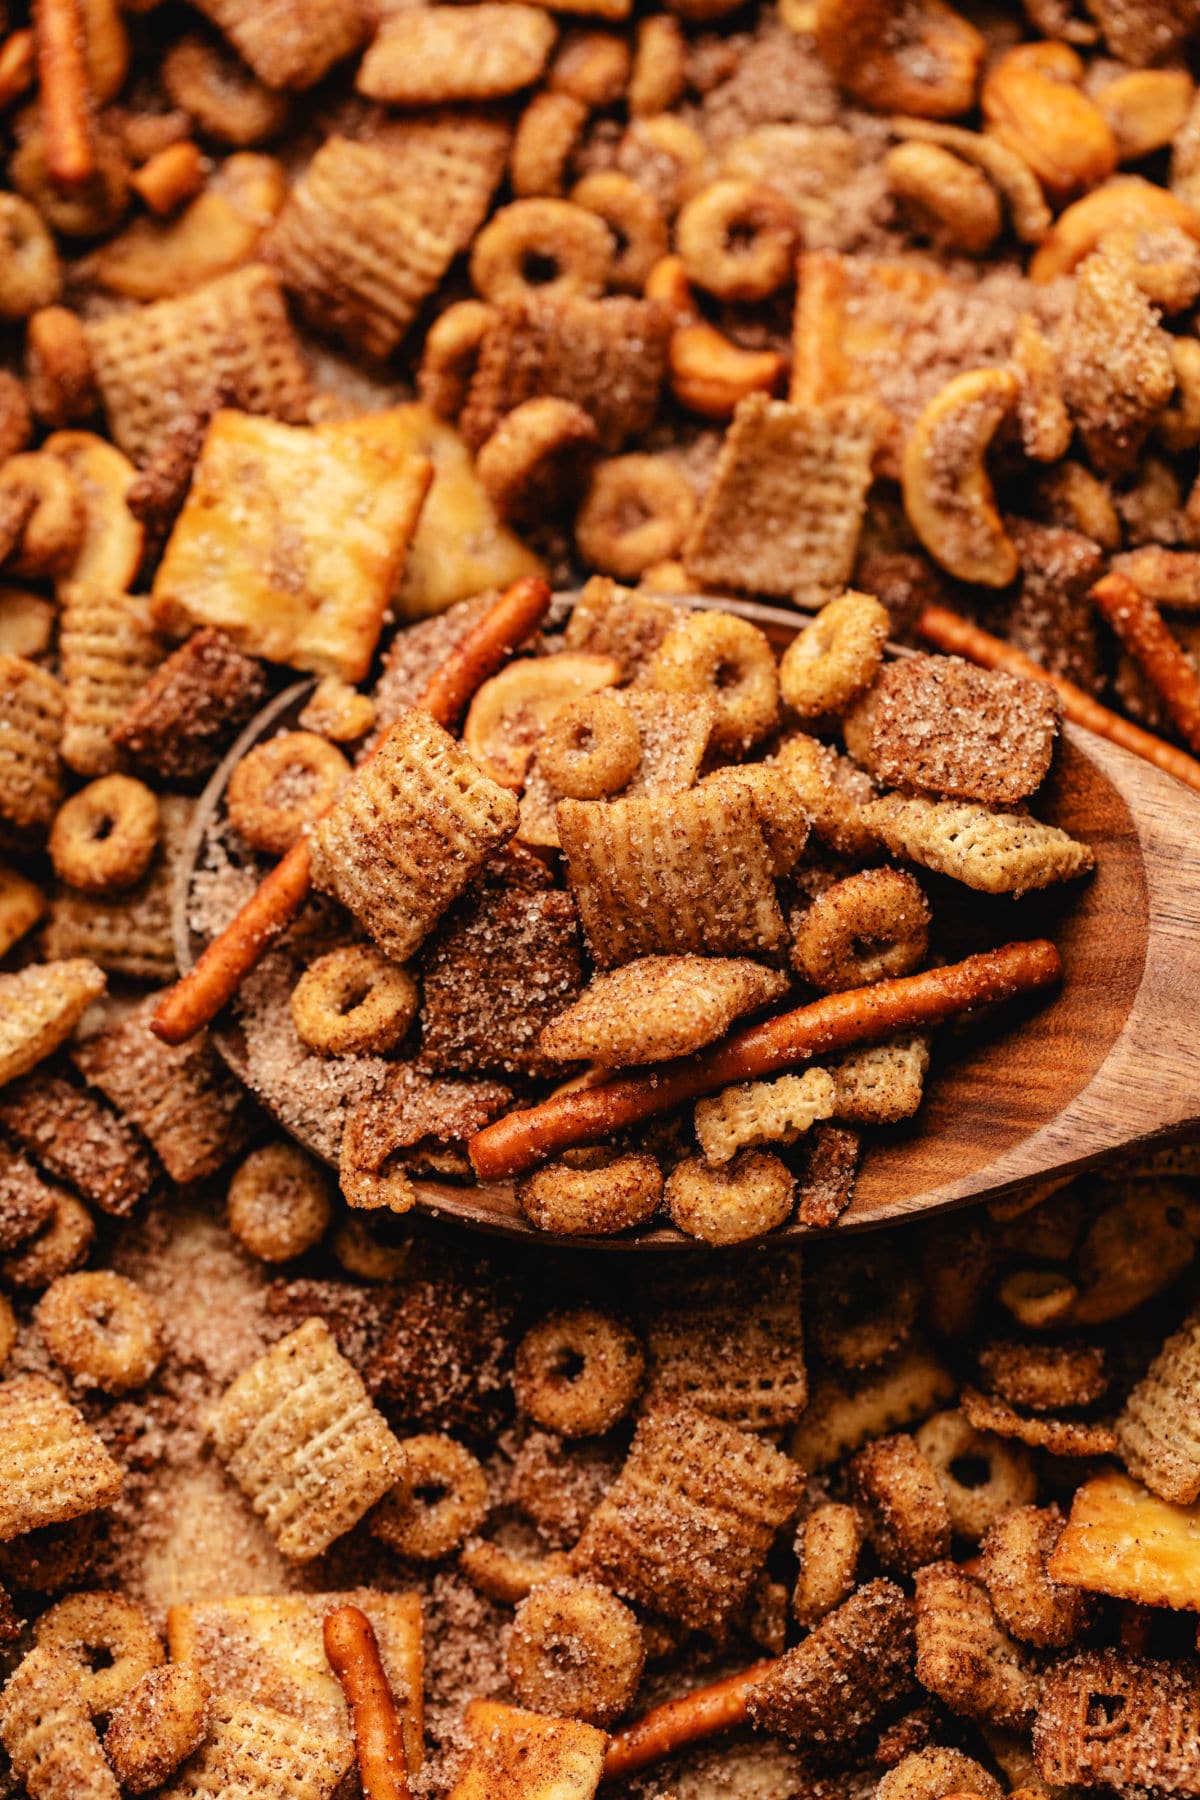 A wooden spoon holding a scoop of Sweet and Salty Chex Mix.